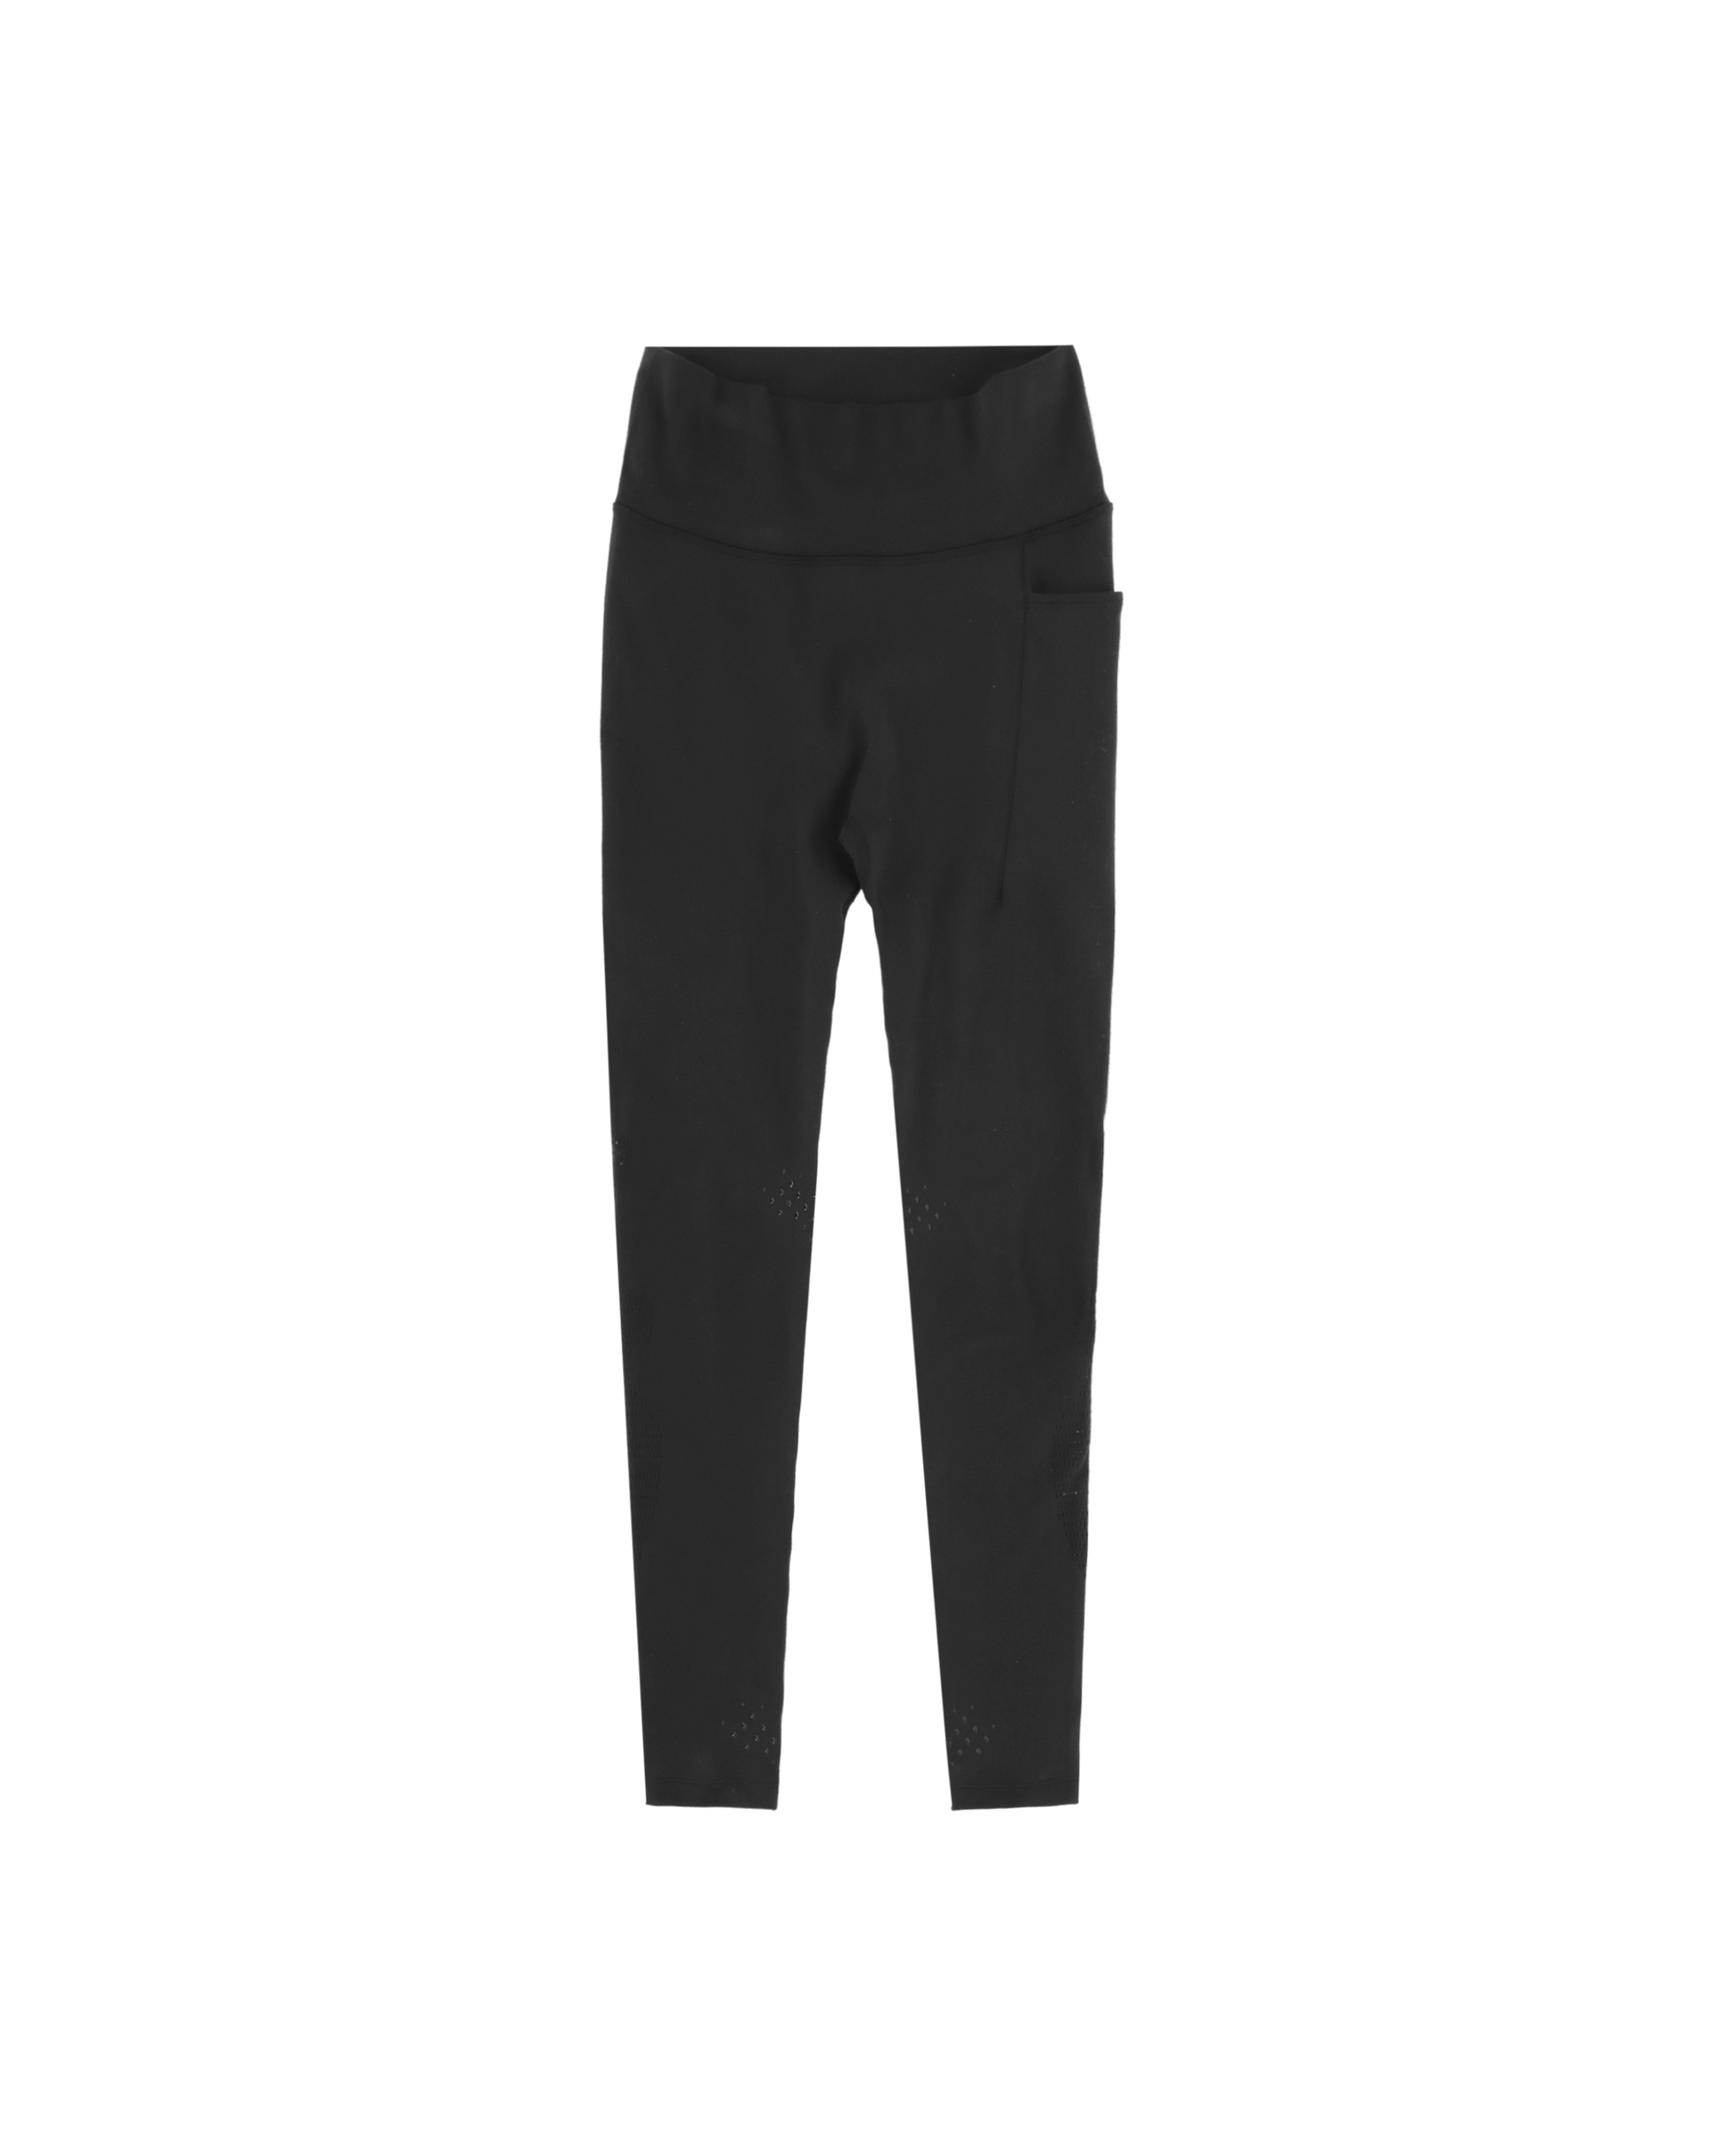 Nike Special Project Wmns Nrg Mmw Df Tight Black Pants Trousers DD9427-010